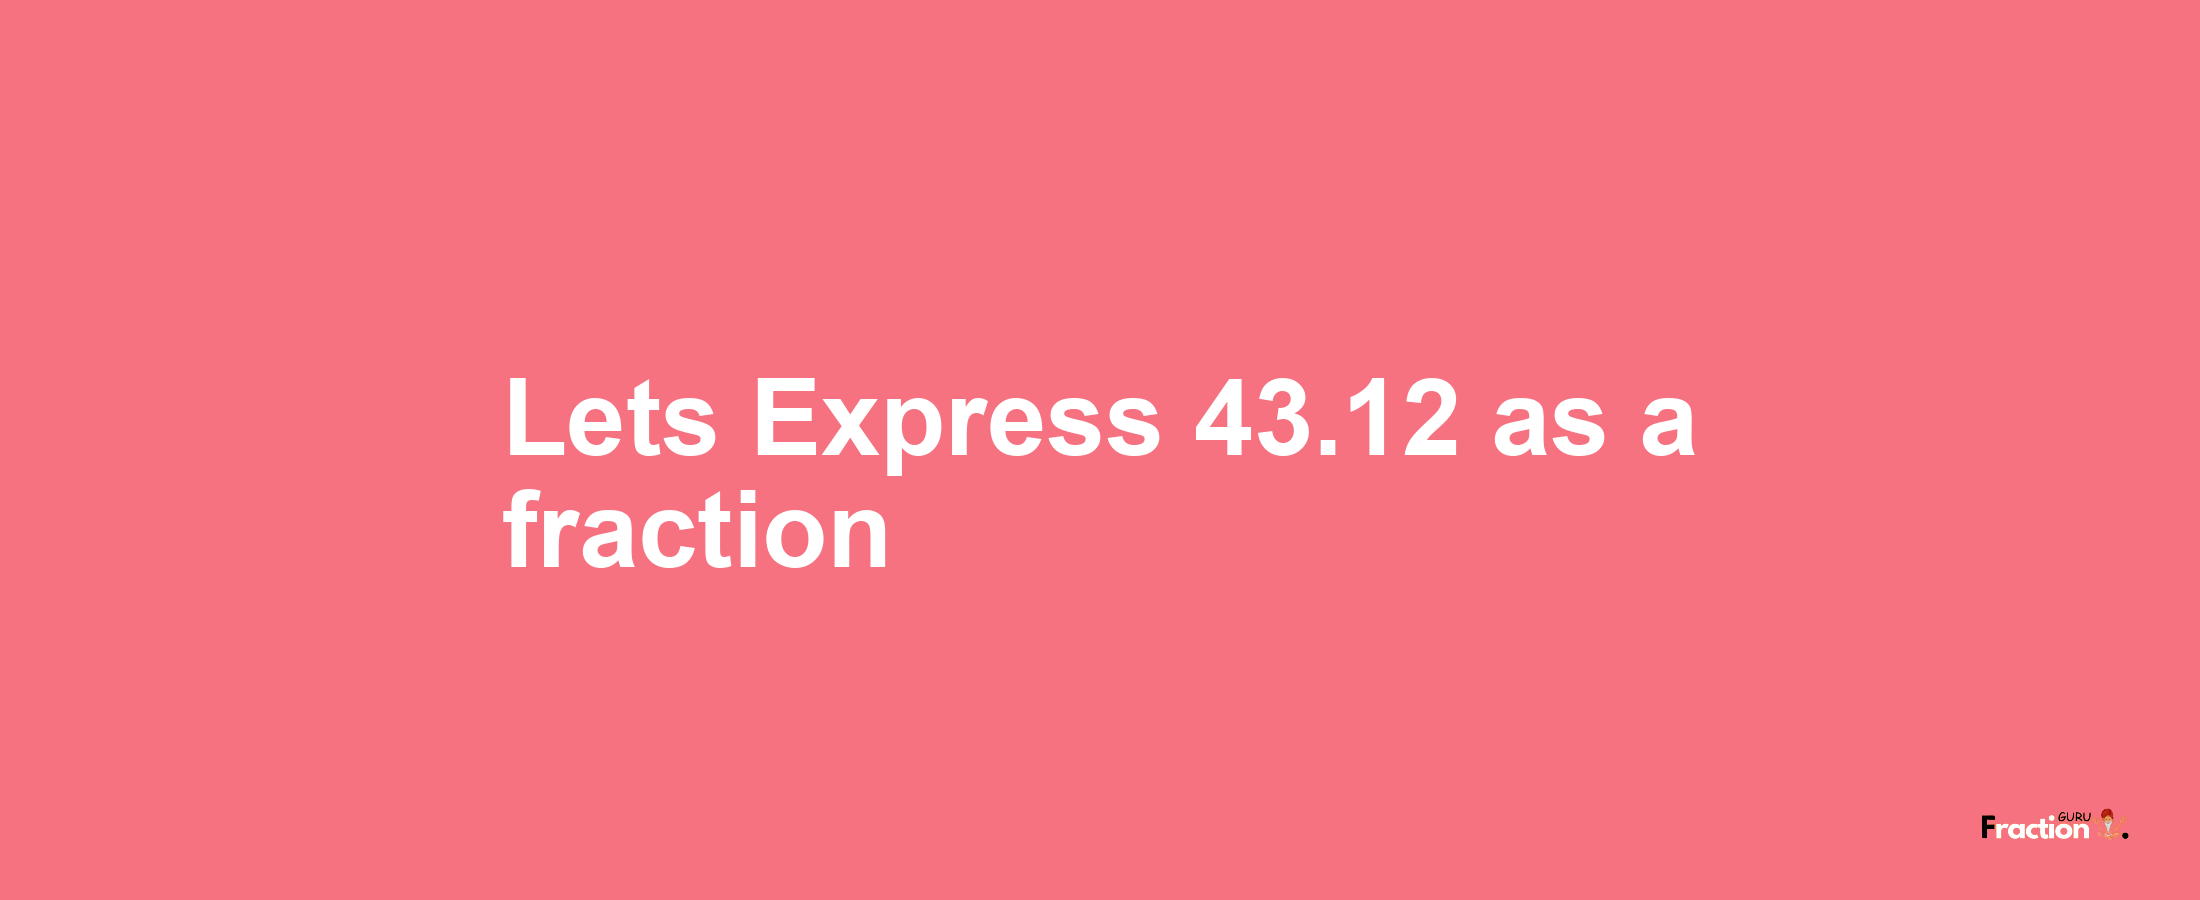 Lets Express 43.12 as afraction